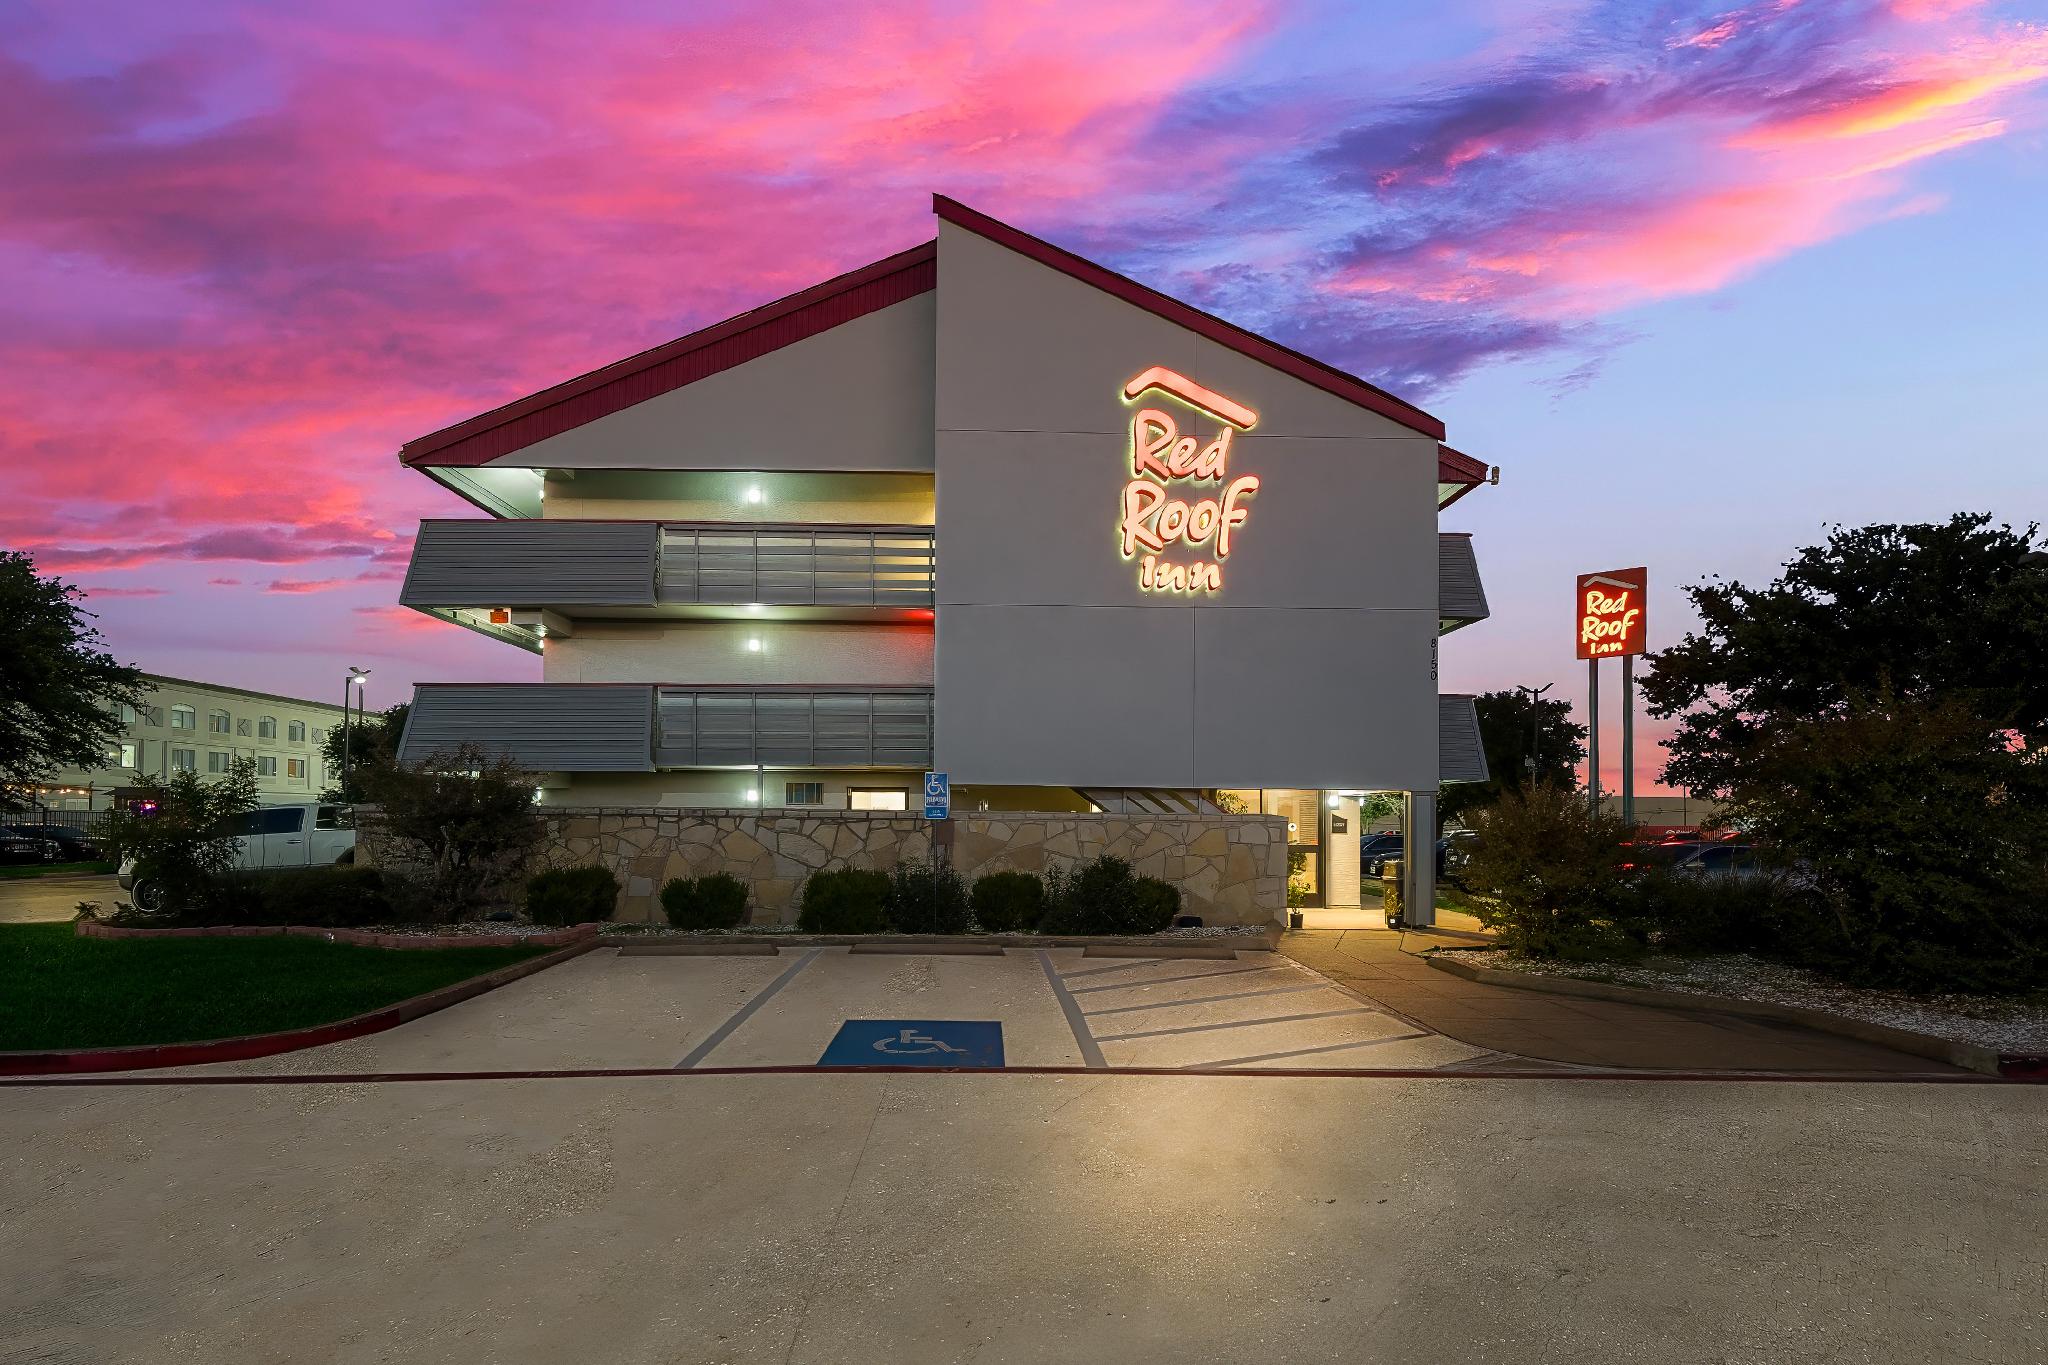 Red Roof Inn Dallas - DFW Airport North 写真